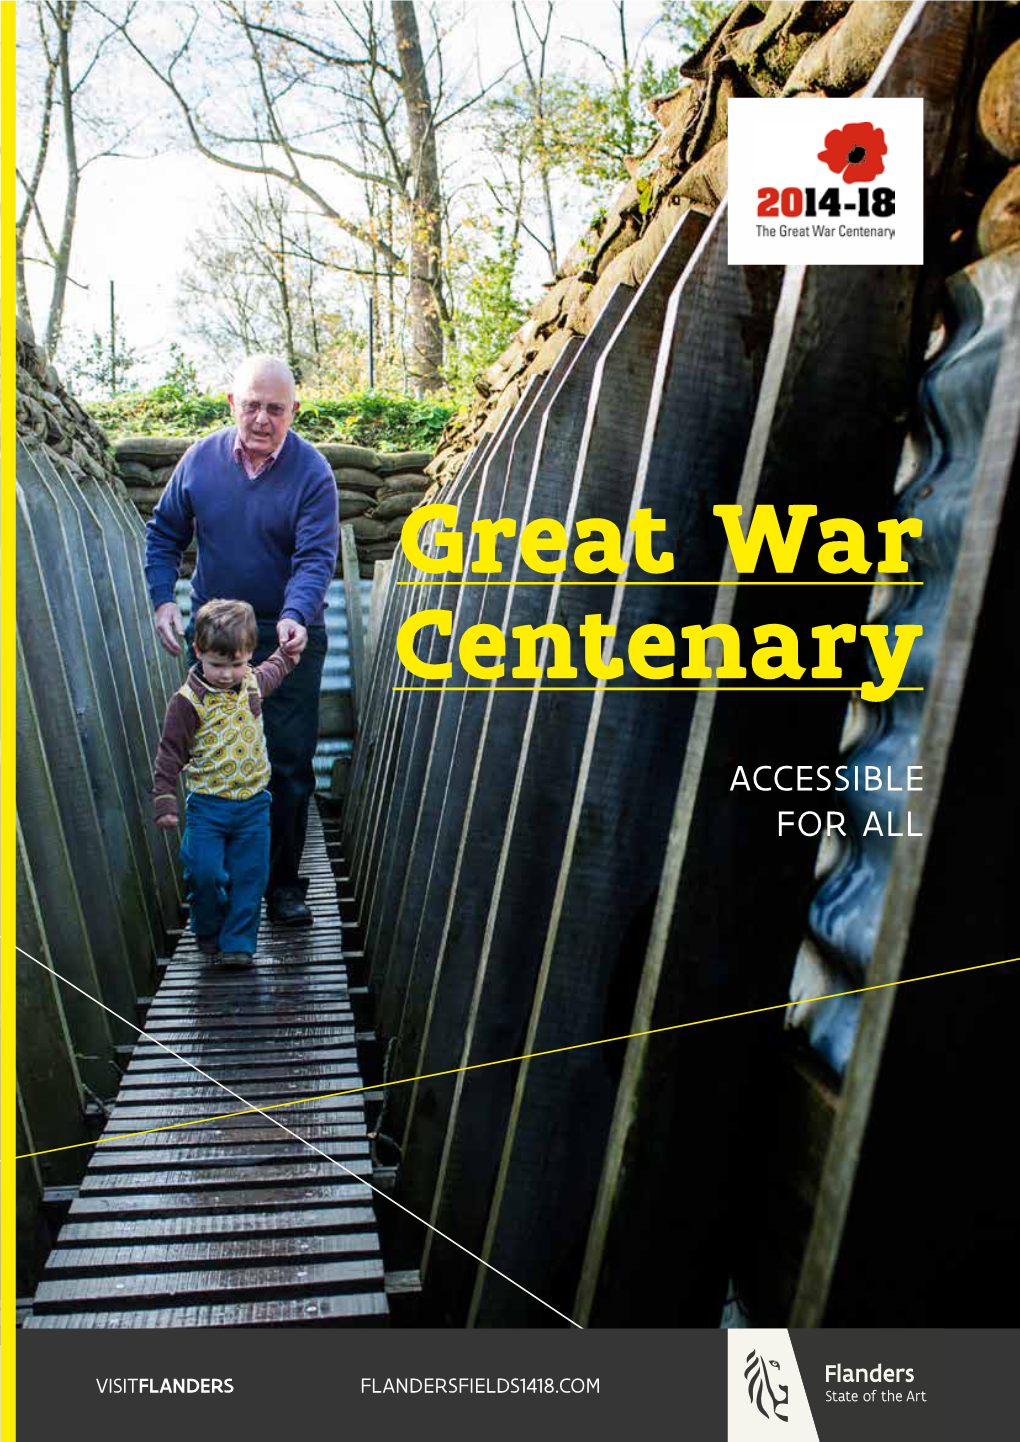 Download Or Order the Brochure the Great War Centenary